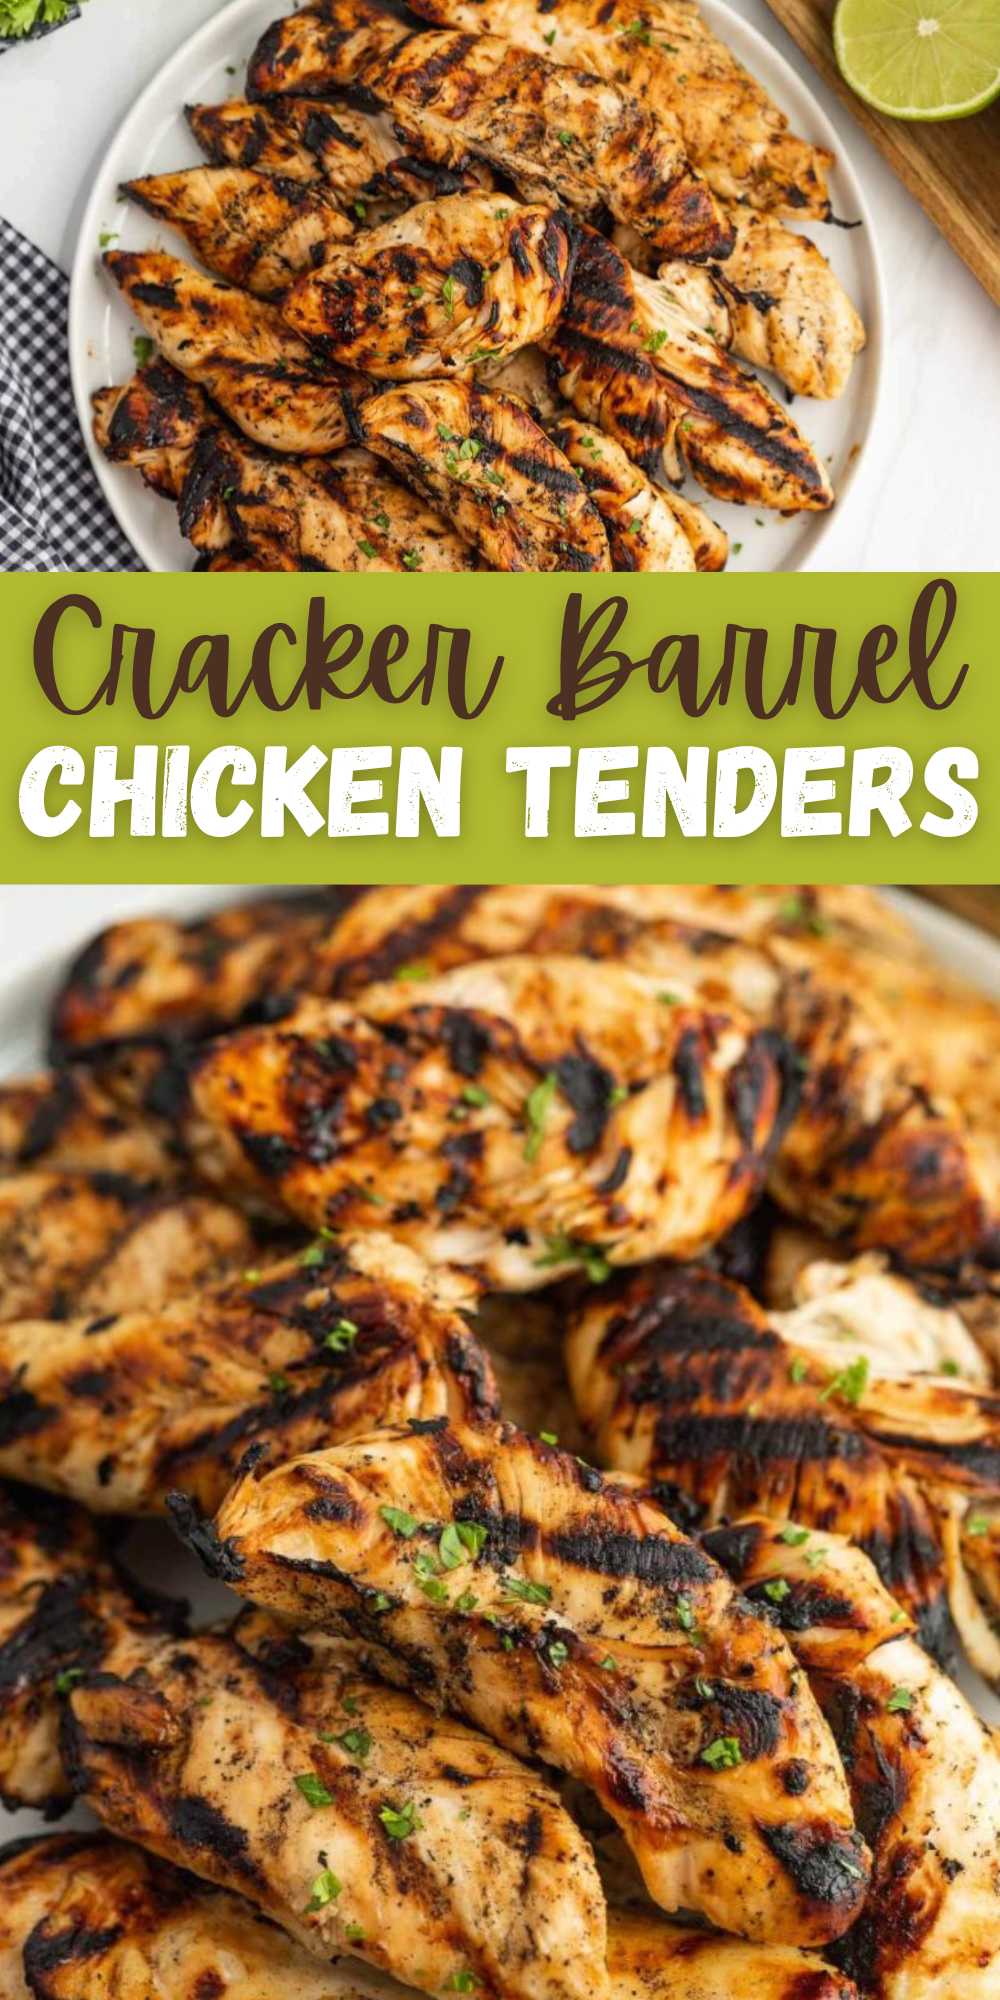 Cracker Barrel Chicken Tenders combines a few ingredients into a flavorful meal. Enjoy Copycat Cracker Barrel Grilled Chicken recipe at home. This recipe is easy to prepare using only 4 ingredients. The cooking time is minimum, and it all comes together effortlessly. #eatingonadime #crackerbarrelchickentender #crackerbarrelcopycatrecipe